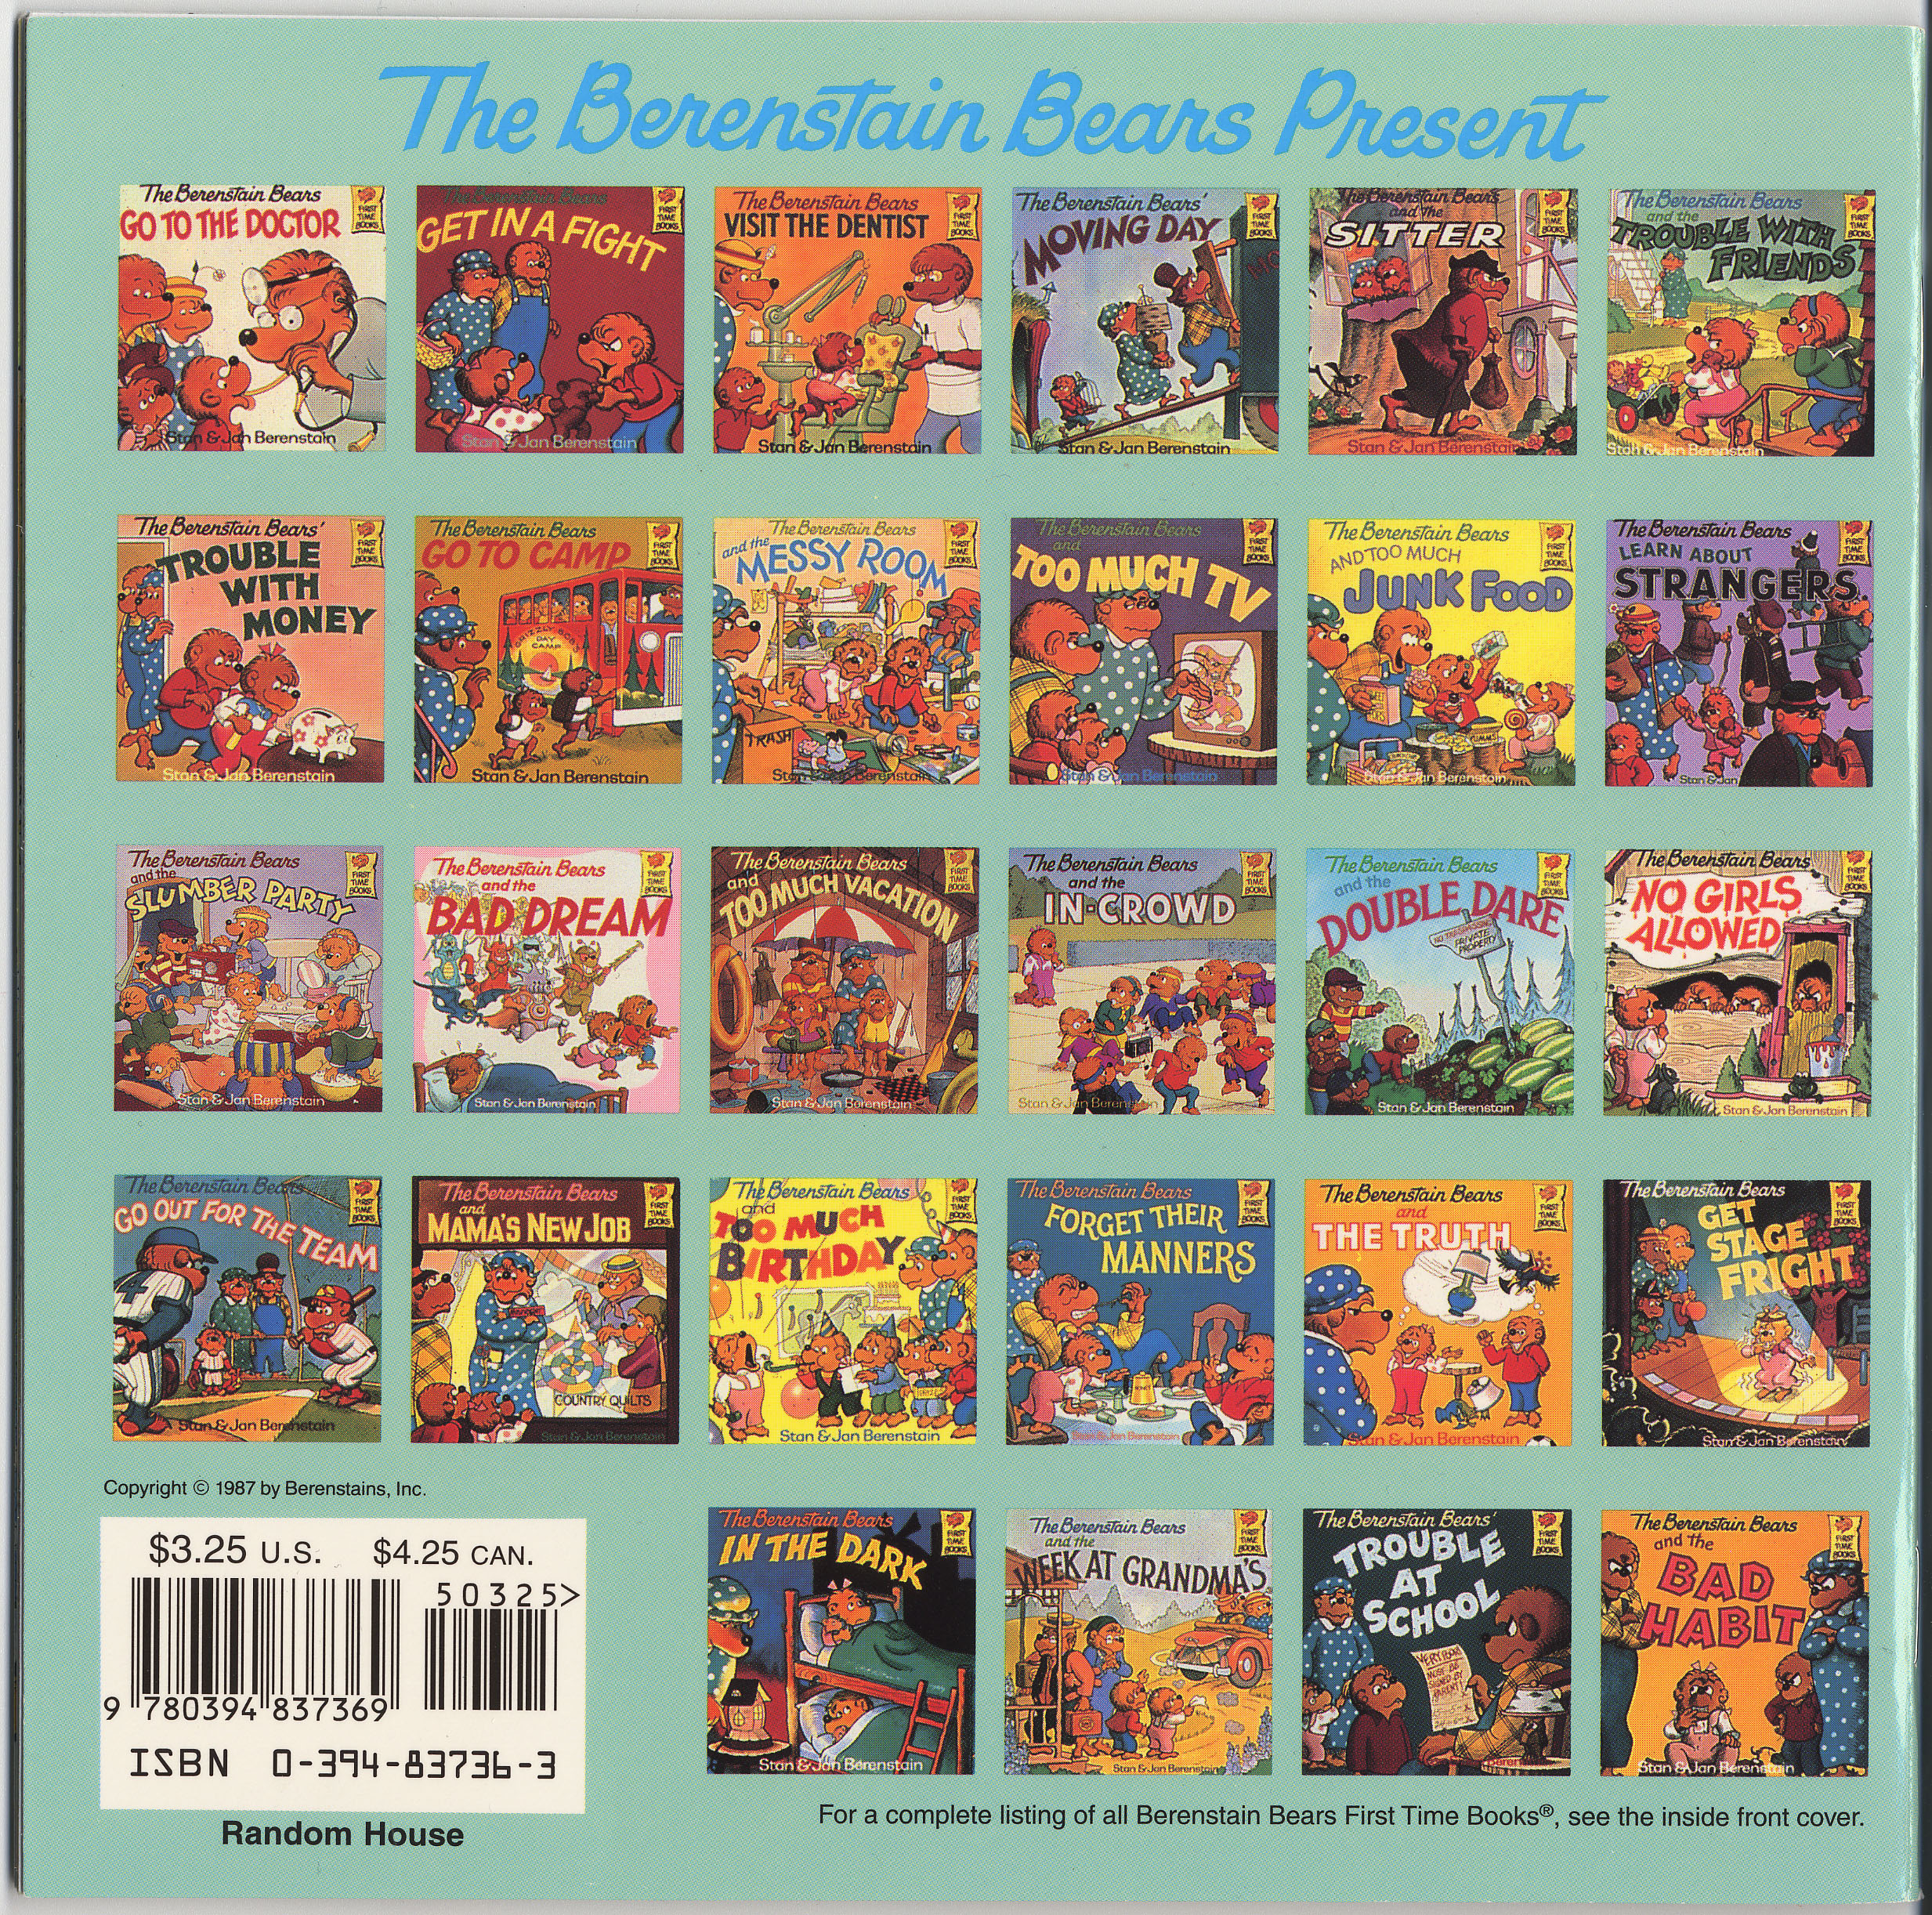 The Berenstain Bears And The Week At Grandma's PDF Free Download